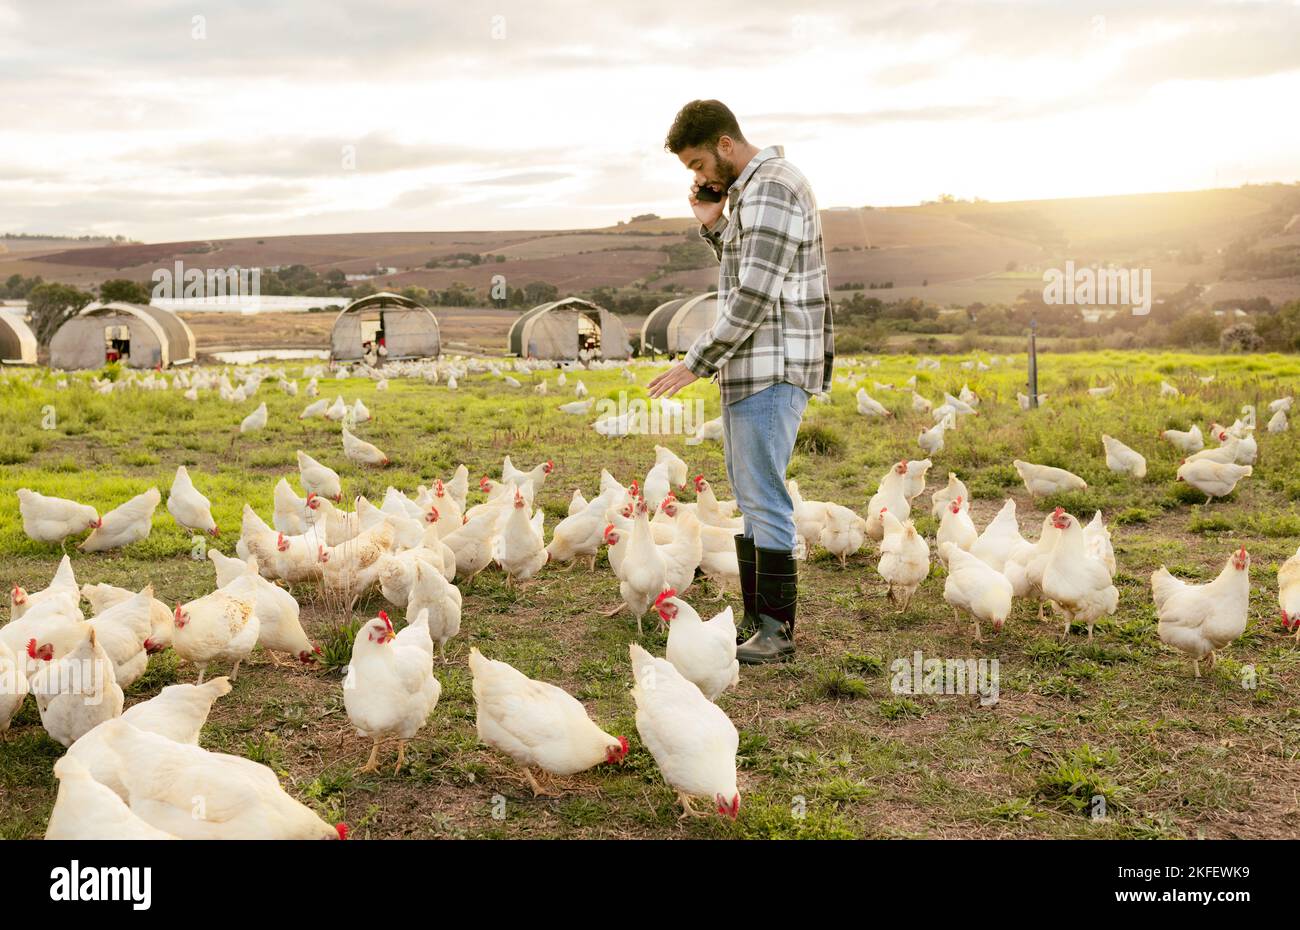 Farm, chickens and phone call with an agriculture man farmer at work on a field for sustainability. Grass, mobile and chicken farming with a male Stock Photo